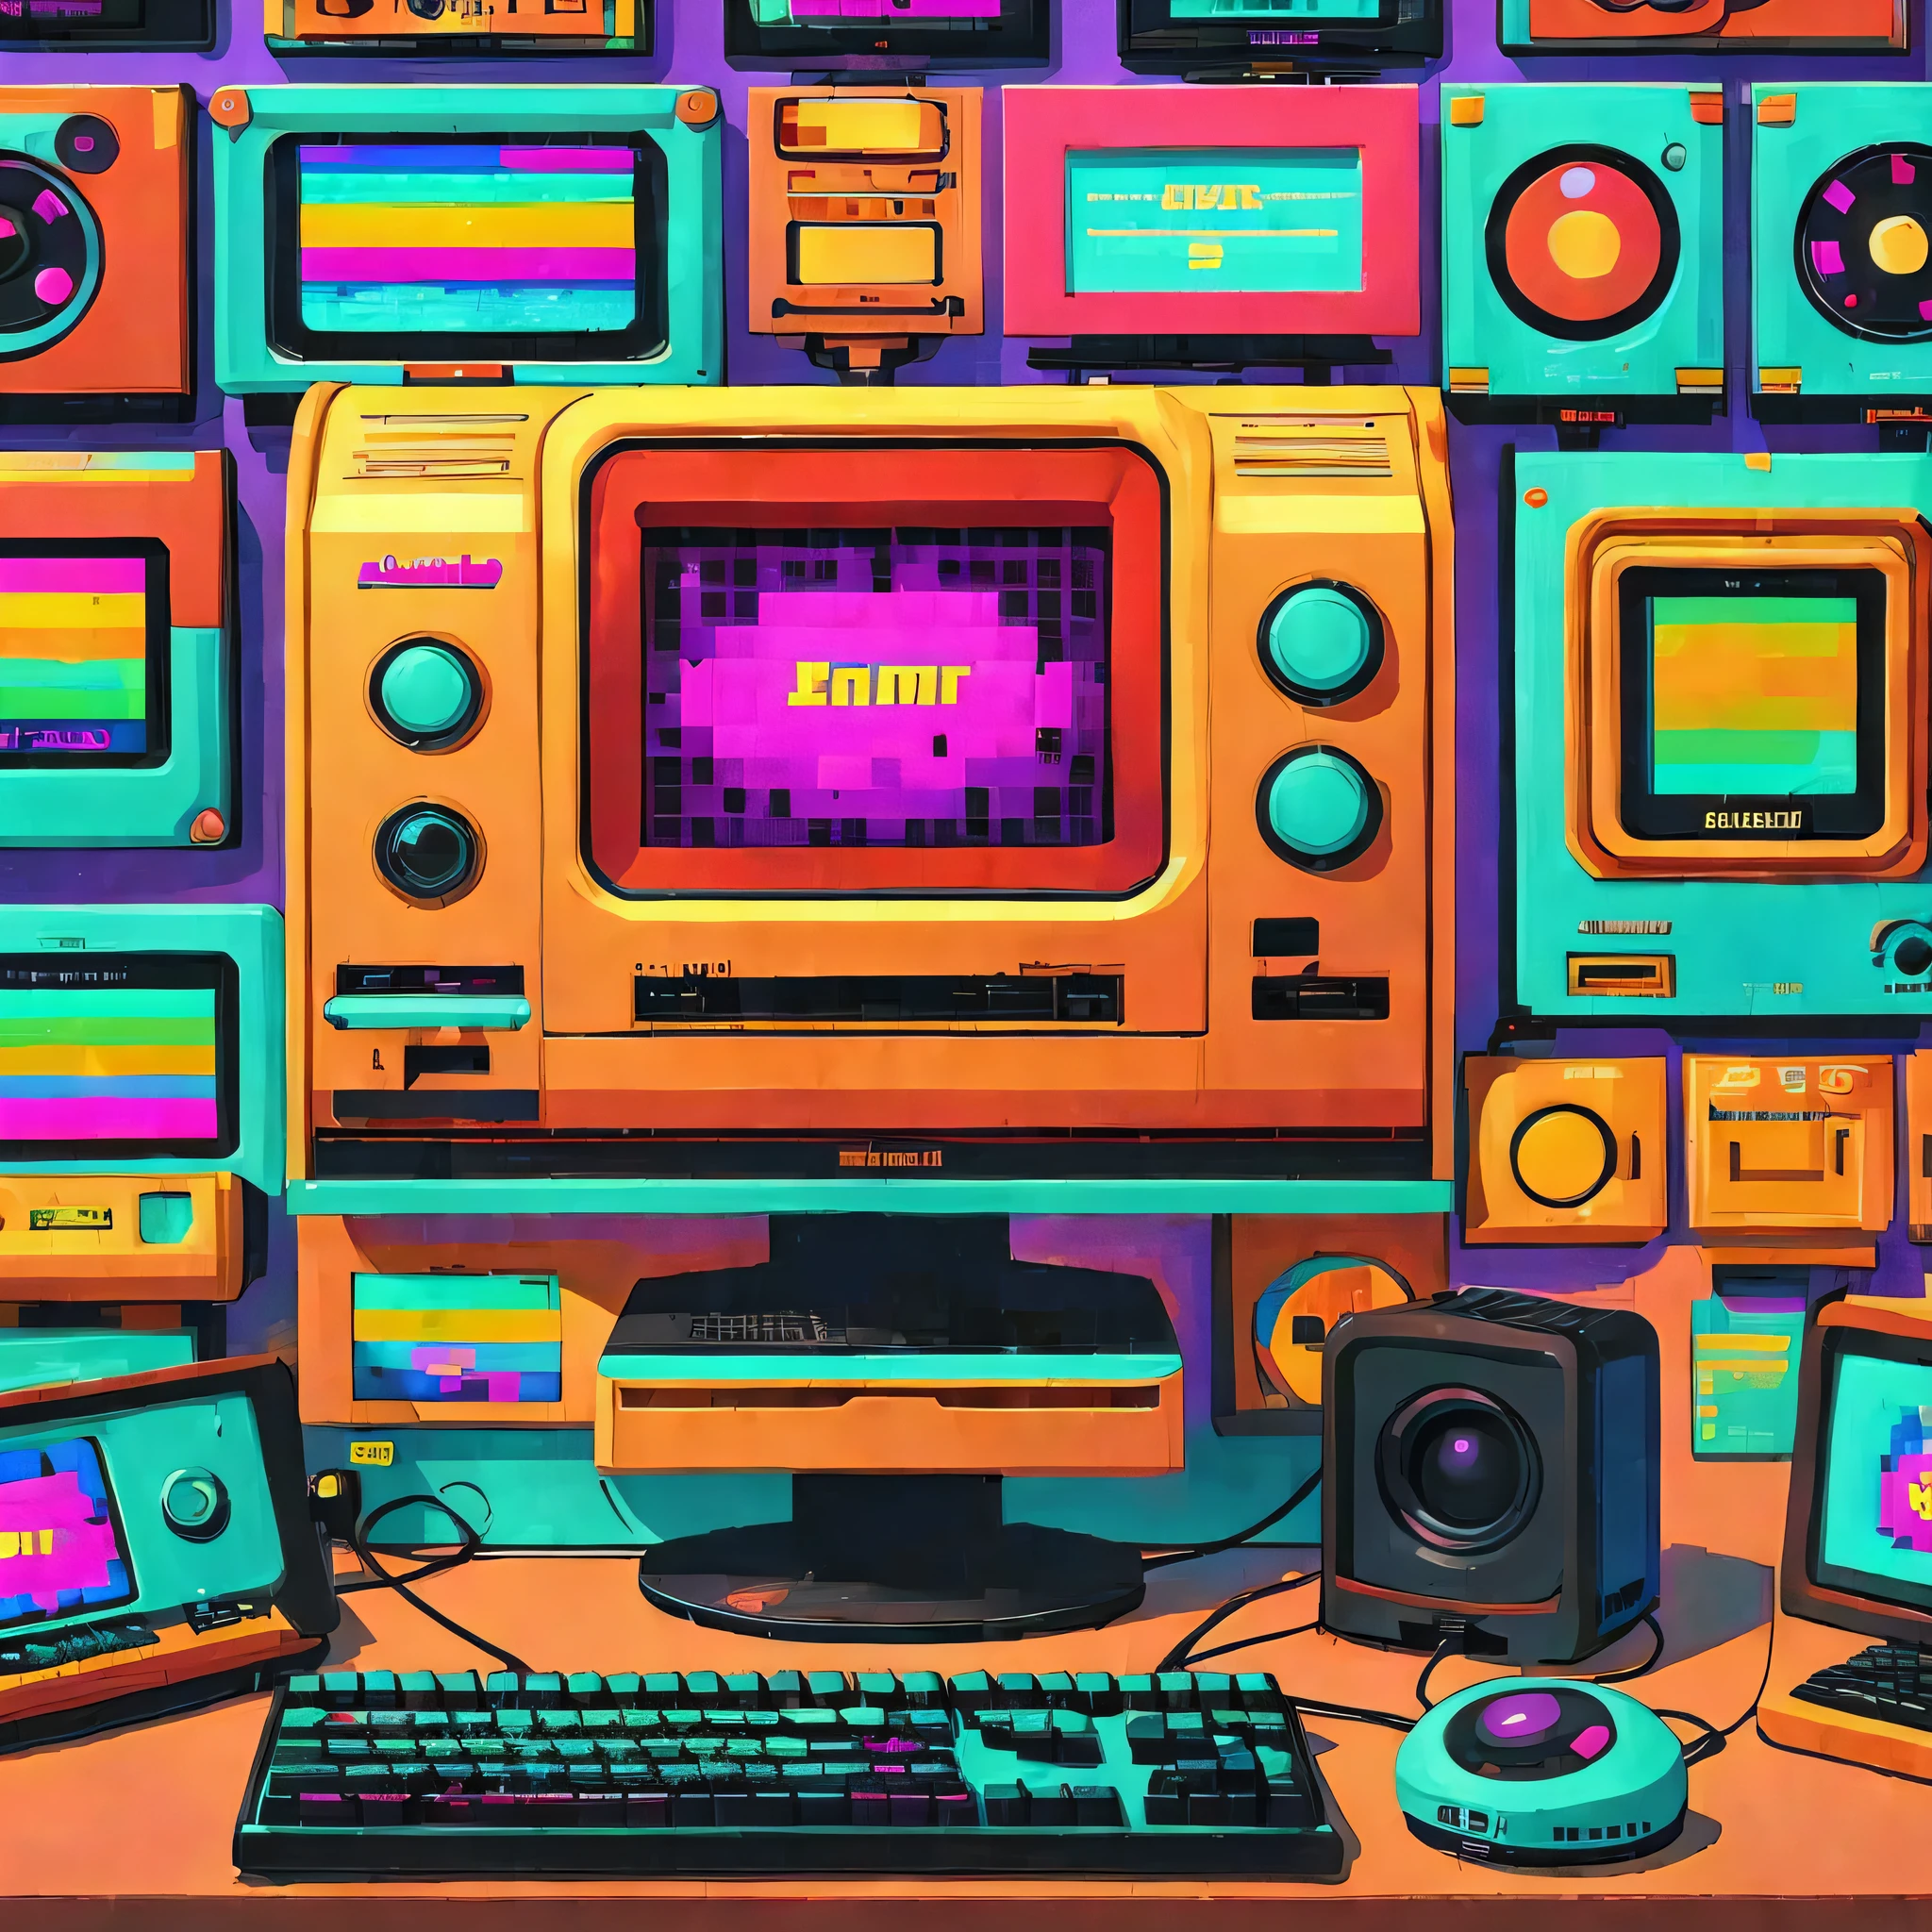 (Best quality),(masterpiece),(ultra detailed),(high detailed),(extremely detailed),Subject: Nostalgic 90s Tech Screensavers Medium: Digital artwork or graphic design. Resolution: 1920x1080 pixels. Color Palette: Vibrant and bold colors reminiscent of the 90s aesthetic. Mood: Retro, playful, and nostalgic. Composition: Centered composition with the screensaver elements positioned creatively. Lighting: Neon or vibrant colored light effects. Style: Pixel art or a mix of pixel art and vector graphics. Details: Include classic 90s tech elements like CRT monitors, floppy disks, dial-up modems, CD-ROMs, pixelated graphics, and retro fonts. Inspiration: Actual 90s screensavers, vintage computer interfaces, and pop culture references from the era. Camera Setup: None (since it's digital artwork). Additional Notes: Emphasize the visual quirks and visual effects commonly seen in 90s screensavers, such as scrolling texts, flying toasters, bouncing balls, morphing shapes, and geometric patterns. Experiment with animated elements to capture the dynamic nature of screensavers. Consider incorporating a sense of humor and playfulness into the design to evoke the nostalgia associated with the era.